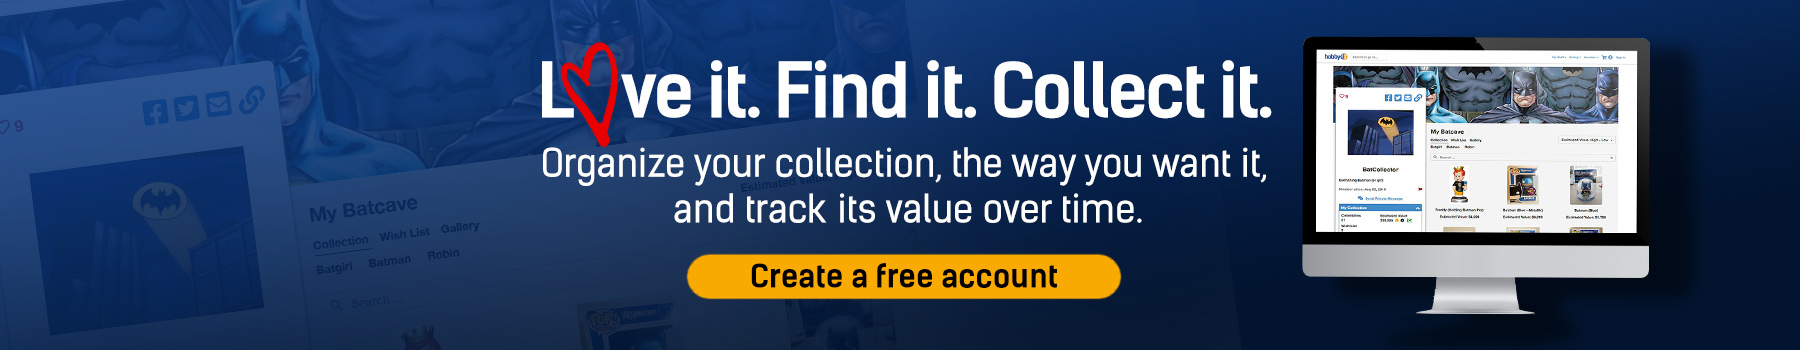 Love it - Find it - Collect it (Correct "its")